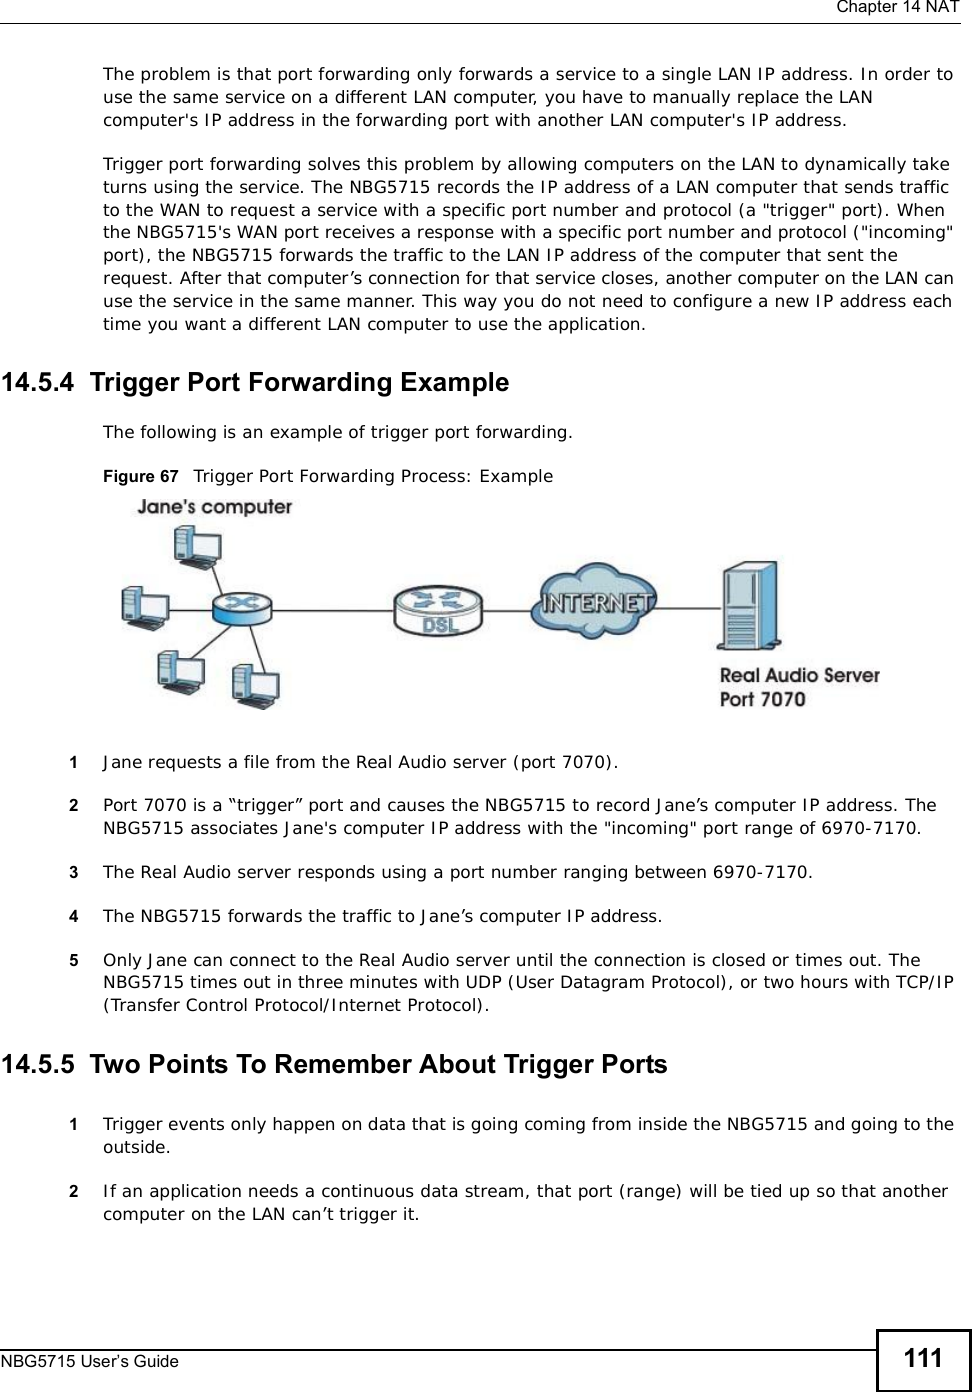  Chapter 14NATNBG5715 User’s Guide 111The problem is that port forwarding only forwards a service to a single LAN IP address. In order to use the same service on a different LAN computer, you have to manually replace the LAN computer&apos;s IP address in the forwarding port with another LAN computer&apos;s IP address. Trigger port forwarding solves this problem by allowing computers on the LAN to dynamically take turns using the service. The NBG5715 records the IP address of a LAN computer that sends traffic to the WAN to request a service with a specific port number and protocol (a &quot;trigger&quot; port). When the NBG5715&apos;s WAN port receives a response with a specific port number and protocol (&quot;incoming&quot; port), the NBG5715 forwards the traffic to the LAN IP address of the computer that sent the request. After that computer’s connection for that service closes, another computer on the LAN can use the service in the same manner. This way you do not need to configure a new IP address each time you want a different LAN computer to use the application.14.5.4  Trigger Port Forwarding Example The following is an example of trigger port forwarding.Figure 67   Trigger Port Forwarding Process: Example1Jane requests a file from the Real Audio server (port 7070).2Port 7070 is a “trigger” port and causes the NBG5715 to record Jane’s computer IP address. The NBG5715 associates Jane&apos;s computer IP address with the &quot;incoming&quot; port range of 6970-7170.3The Real Audio server responds using a port number ranging between 6970-7170.4The NBG5715 forwards the traffic to Jane’s computer IP address. 5Only Jane can connect to the Real Audio server until the connection is closed or times out. The NBG5715 times out in three minutes with UDP (User Datagram Protocol), or two hours with TCP/IP (Transfer Control Protocol/Internet Protocol). 14.5.5  Two Points To Remember About Trigger Ports1Trigger events only happen on data that is going coming from inside the NBG5715 and going to the outside.2If an application needs a continuous data stream, that port (range) will be tied up so that another computer on the LAN can’t trigger it.